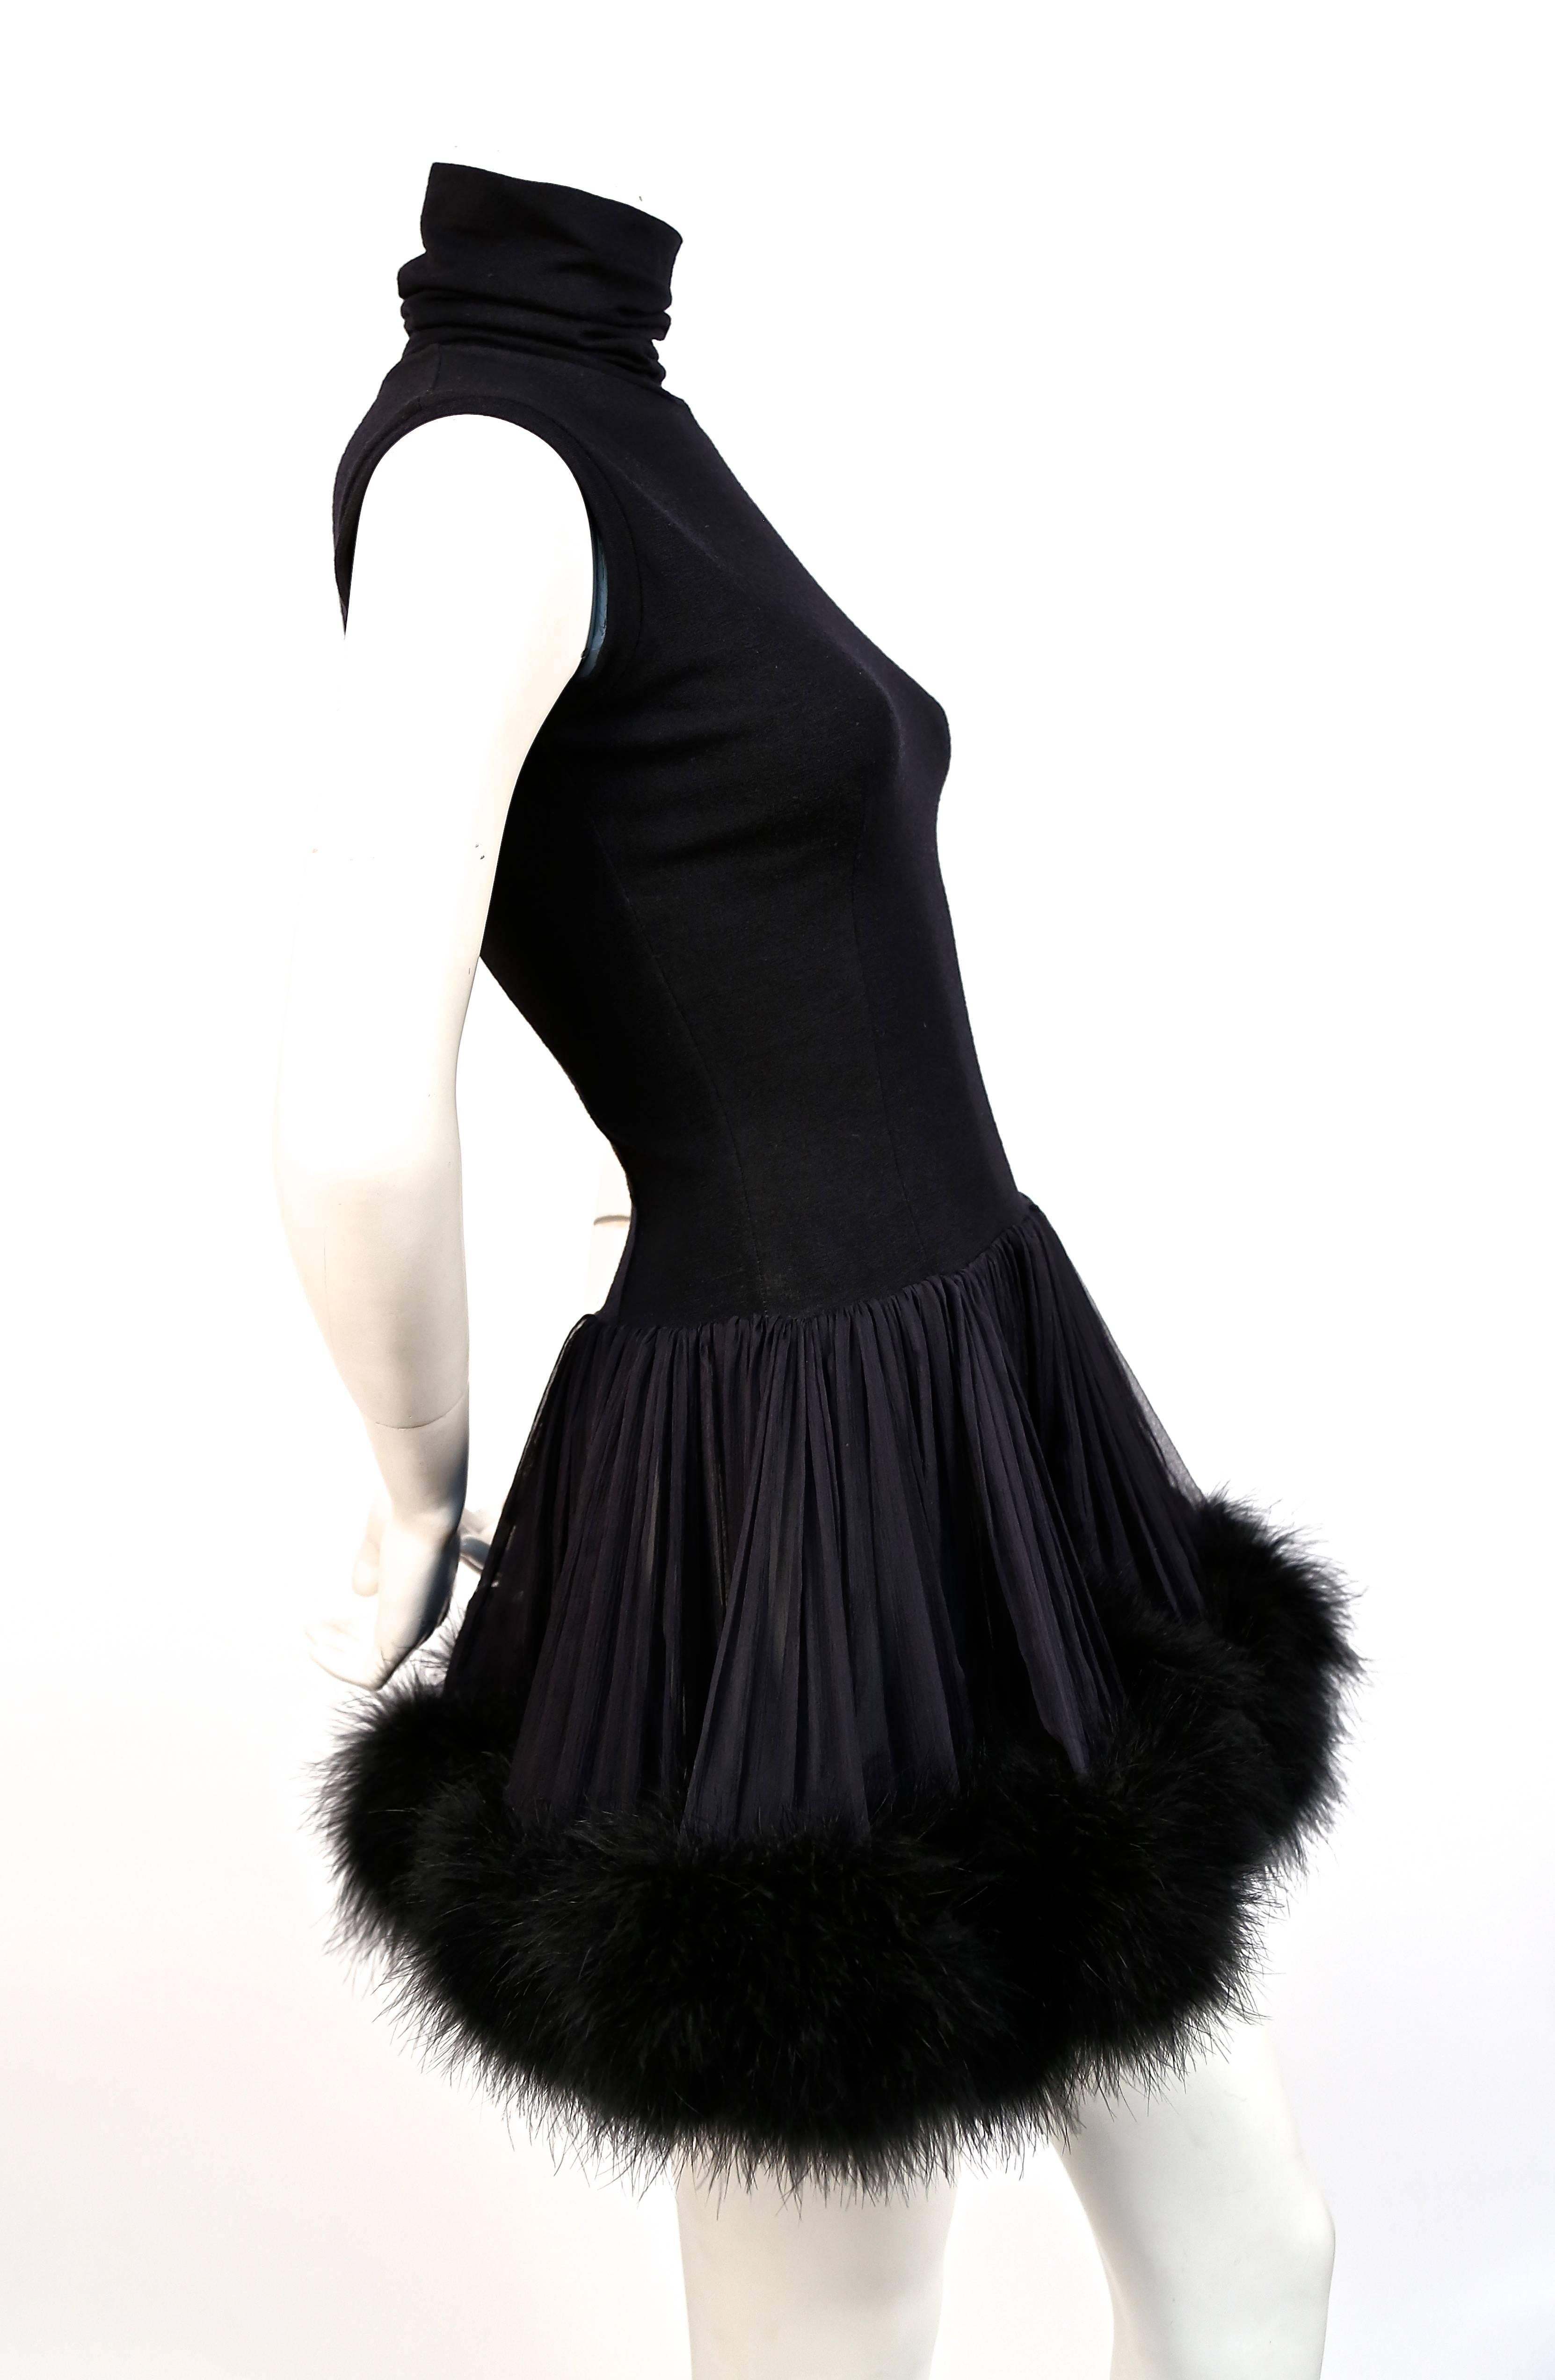 Black wool mini dress with silk and marabou feather trim designed by Dolce & Gabbana dating to the 1980's. Labeled an Italian size 42 however this would best fit a US 2 or 4. Approximate measurements: shoulder 14